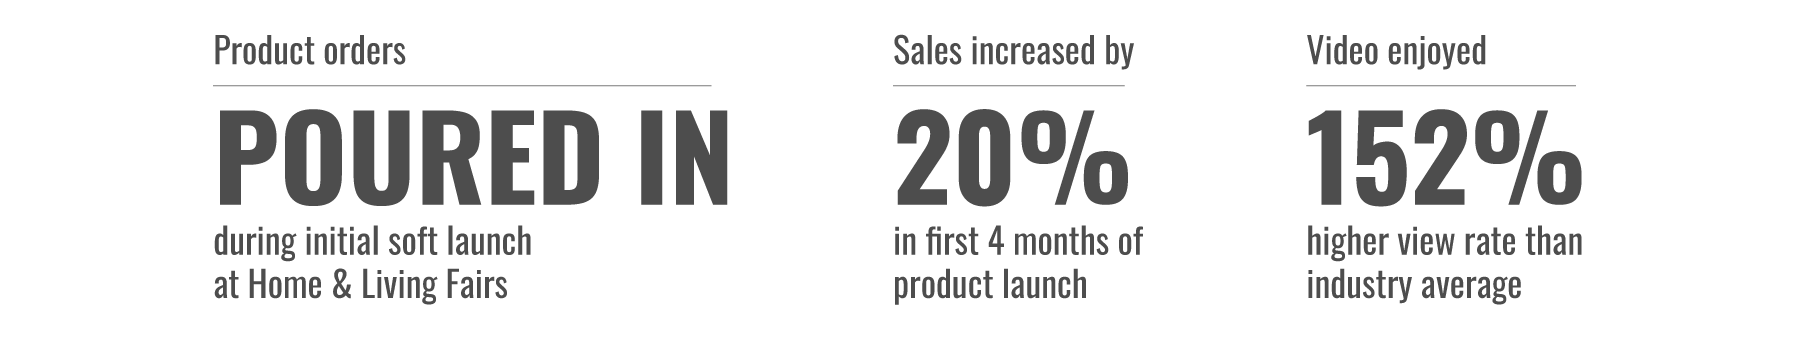 Product orders POURED IN during initial soft launch at Home & Living Fairs | Sales increased by 20% in first 4 months of product launch | Video enjoyed 150% higher view rate than industry average